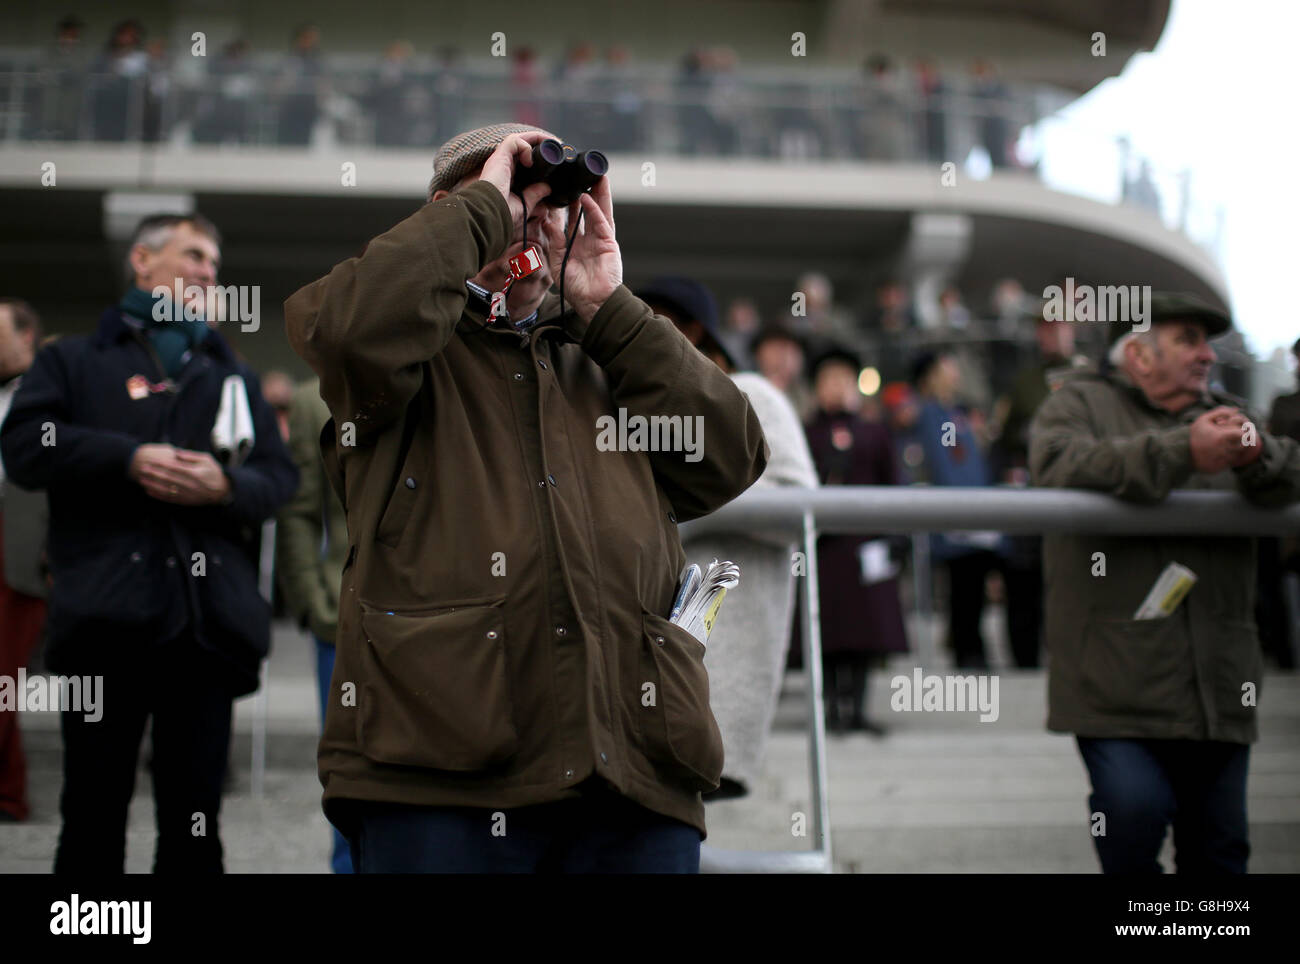 A racegoer in the stands during day one of The International at Cheltenham Racecourse. Stock Photo